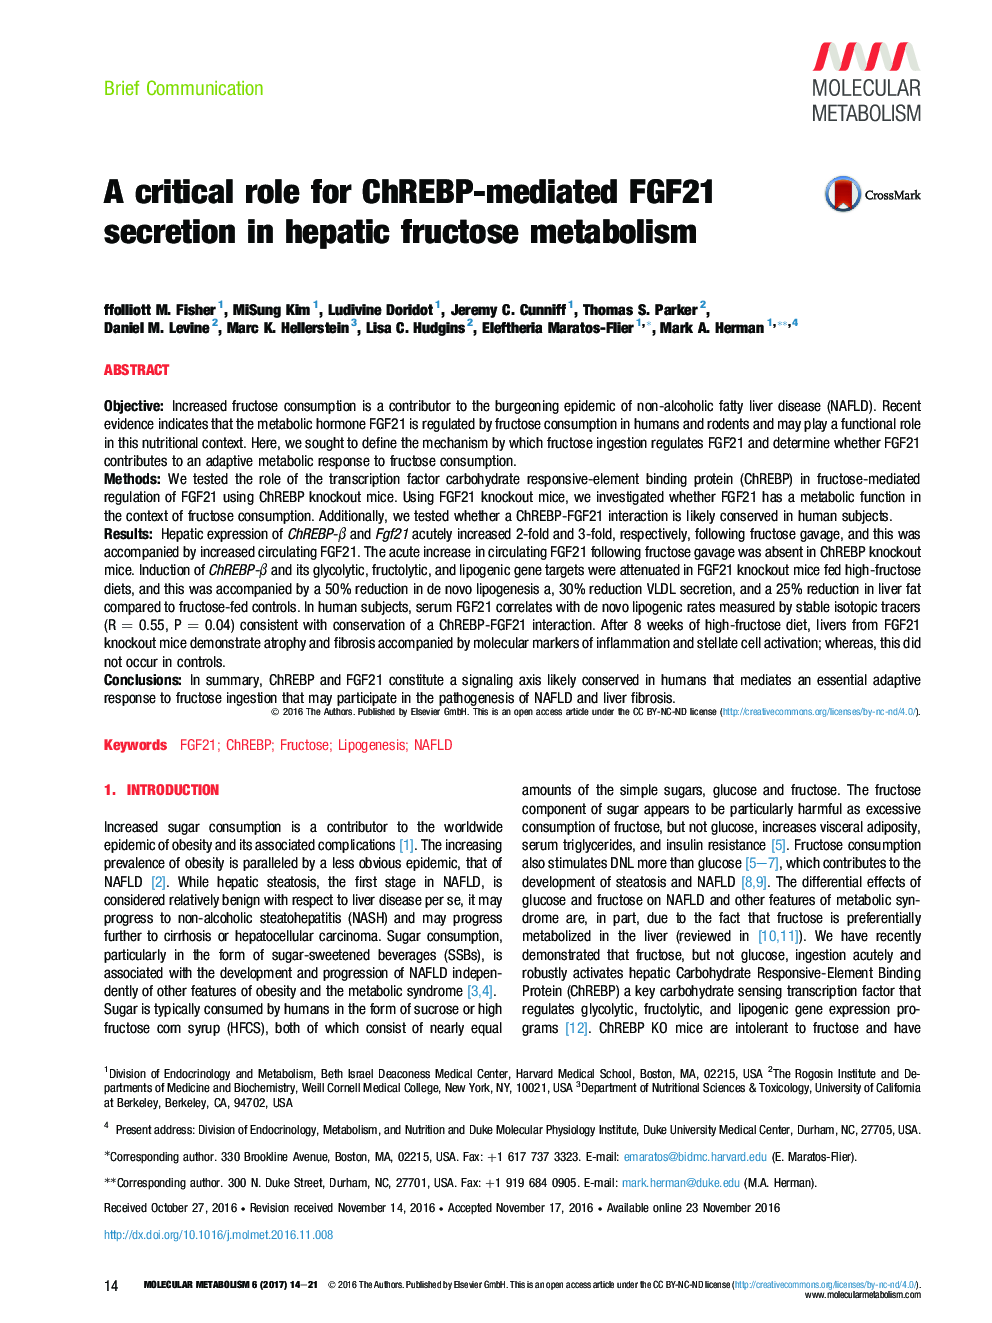 A critical role for ChREBP-mediated FGF21 secretion in hepatic fructose metabolism